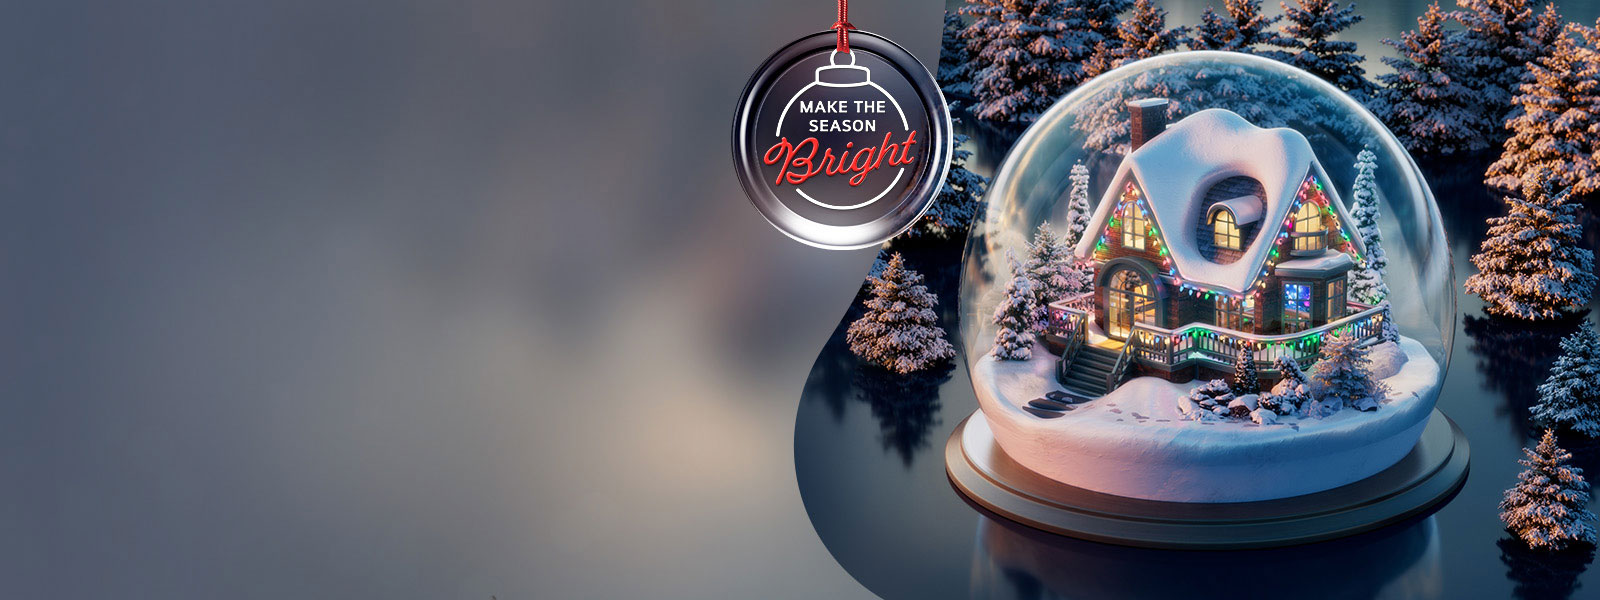 A snow-covered home decorated for the holidays inside a snow globe